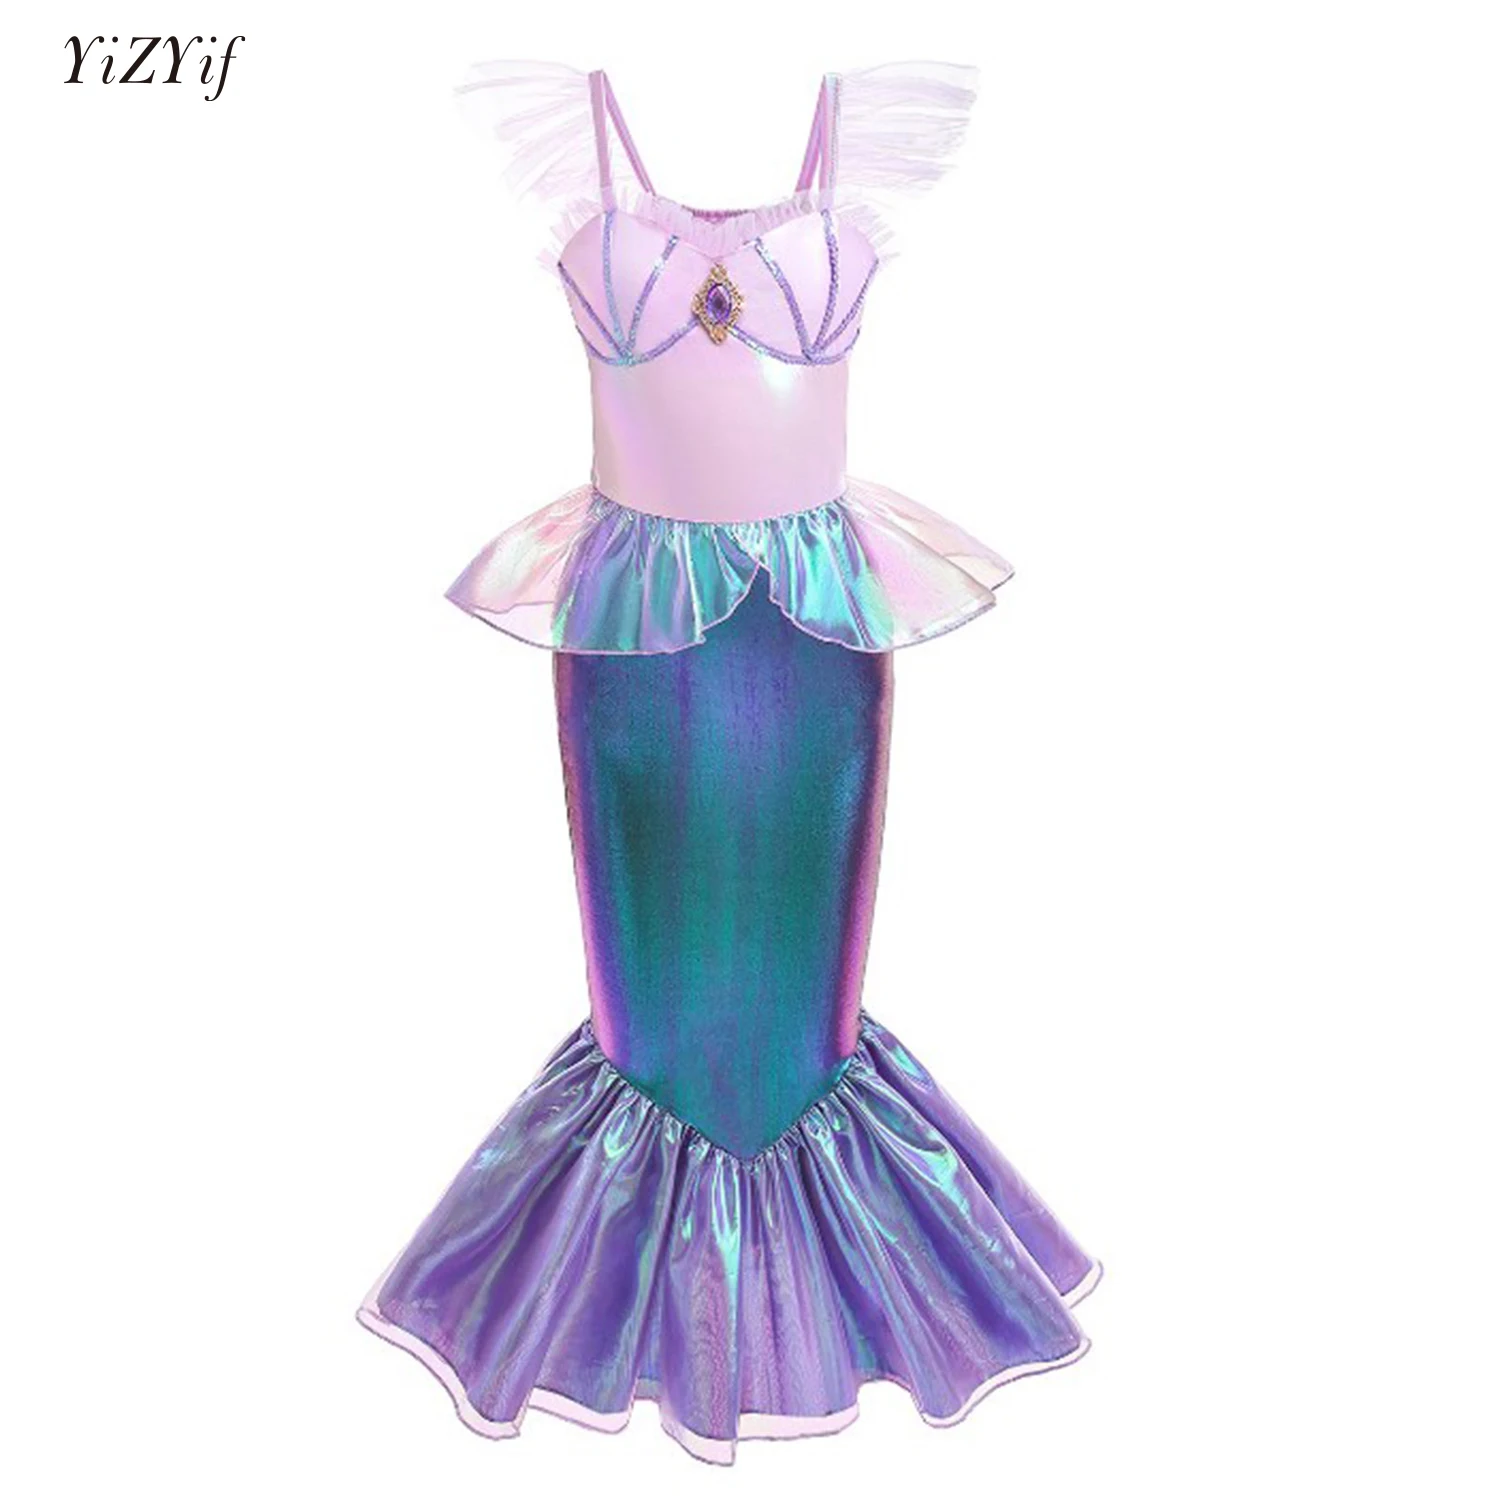 

Kids Girls Halloween Cosplay Costume Toddlers Mermaid Princess Tutu Dress Prom Carnival Theme Party Dress Up Roleplay Clothes